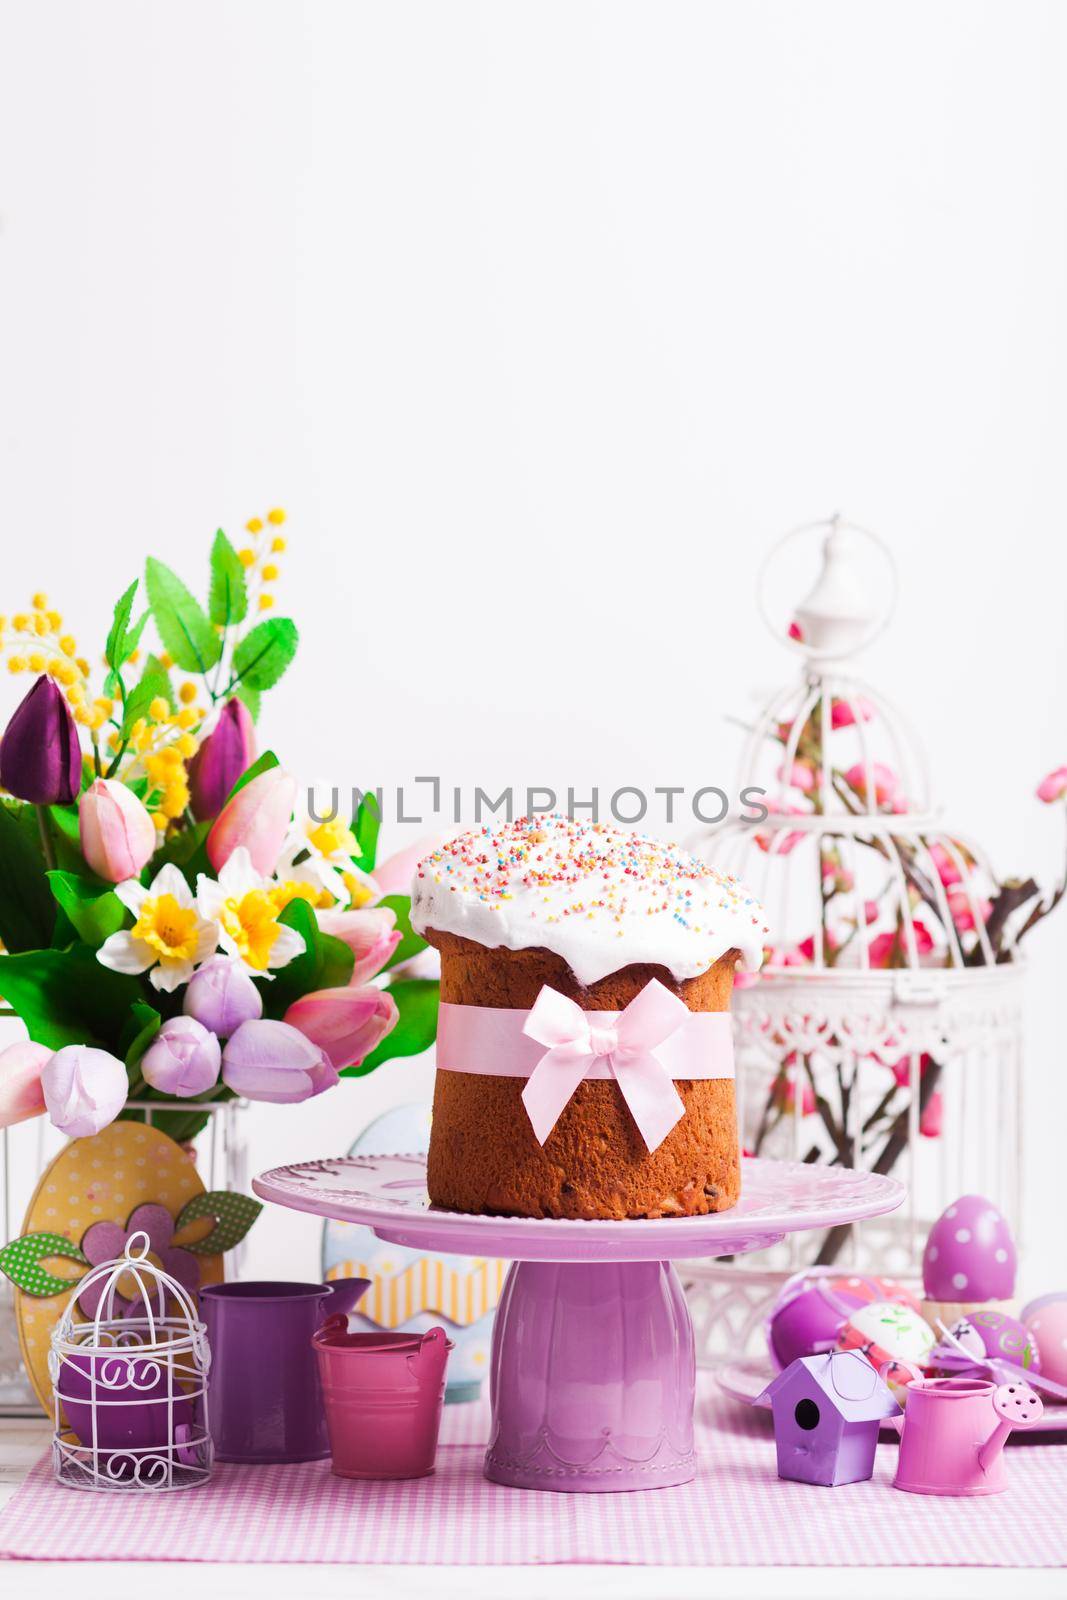 Easter cake on the cake stand and flowers, lilac desorations on the foreground with copy space